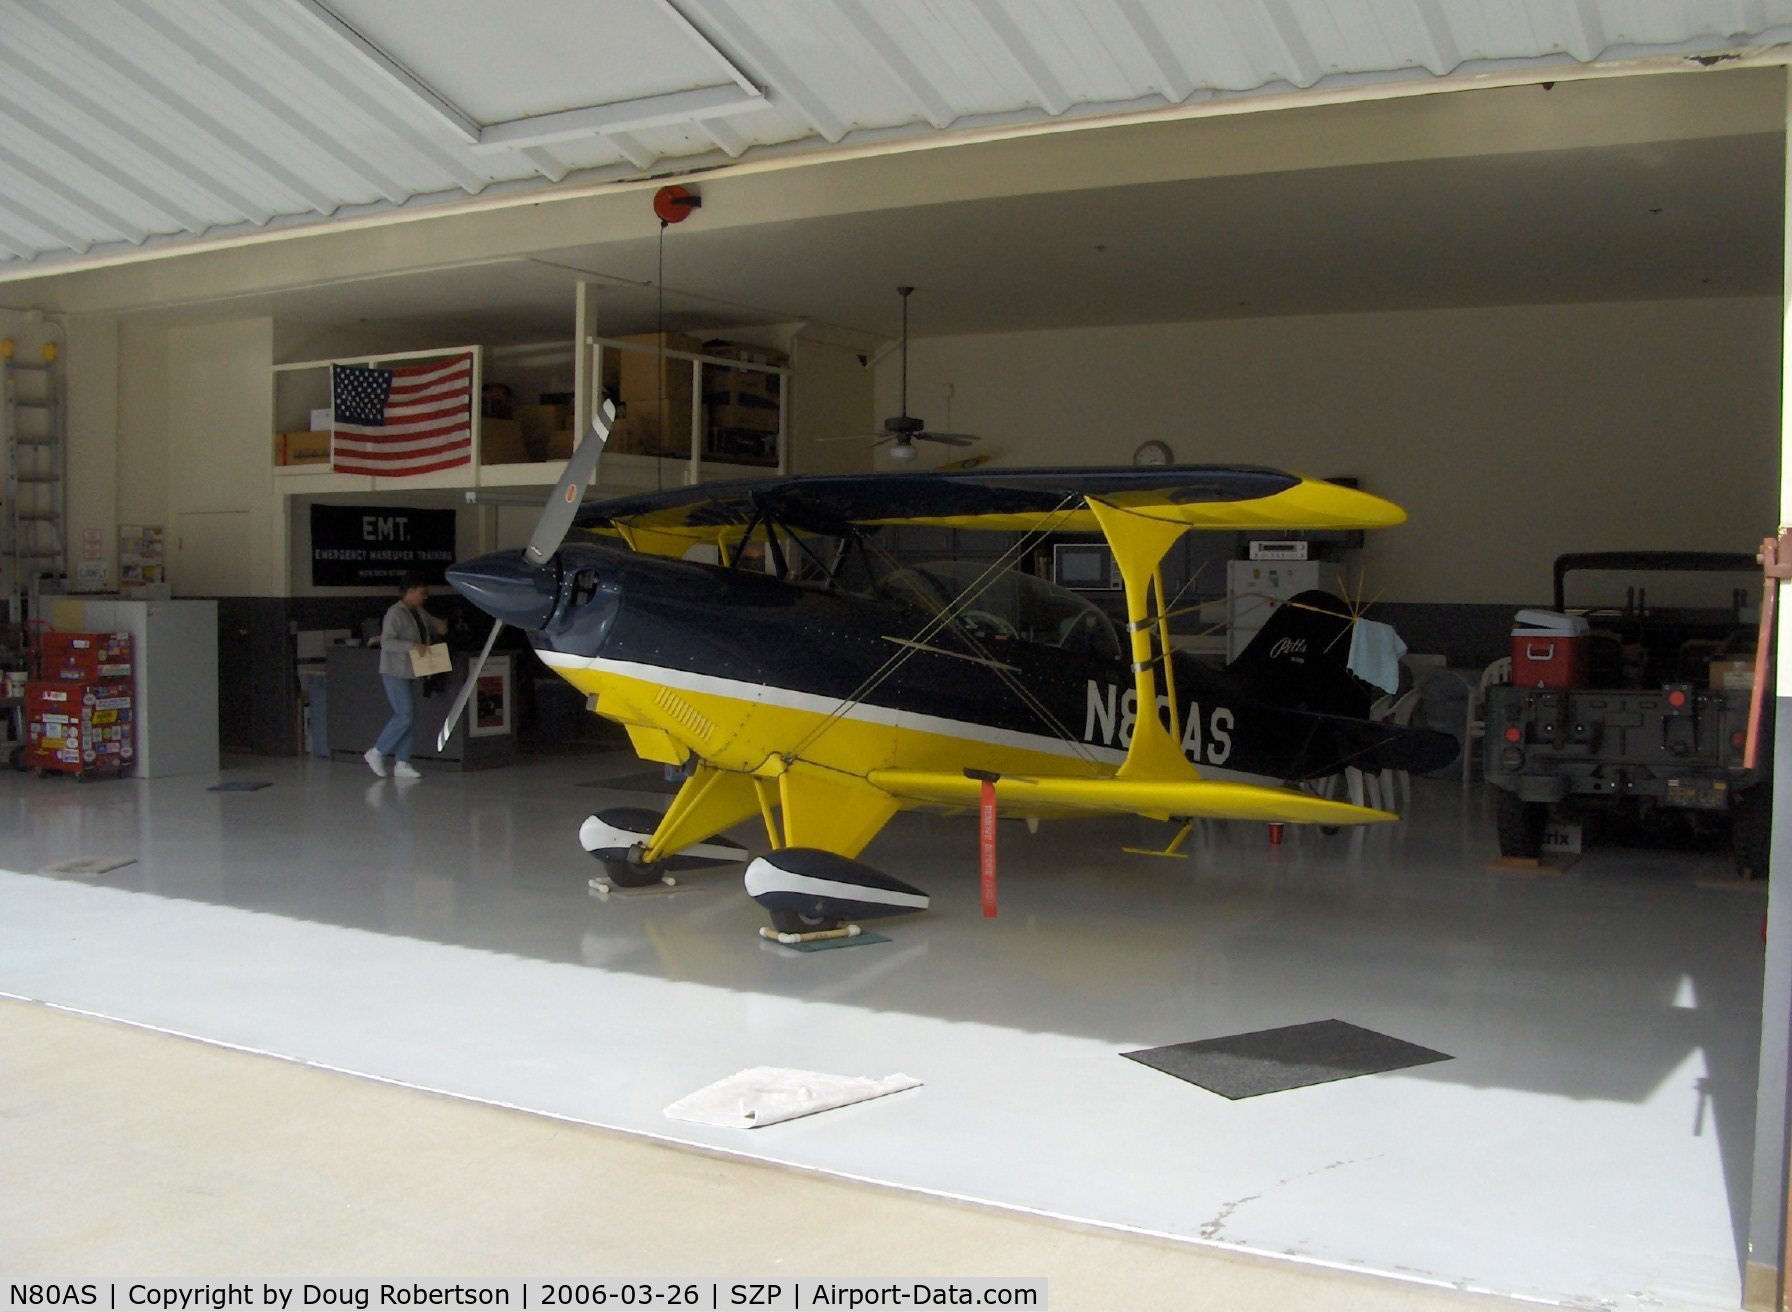 N80AS, 1992 Pitts S-2B Special C/N 5244, 1992 Pitts Aerobatics S-2B, Lycoming AEIO-540, Std. class, back in hangar